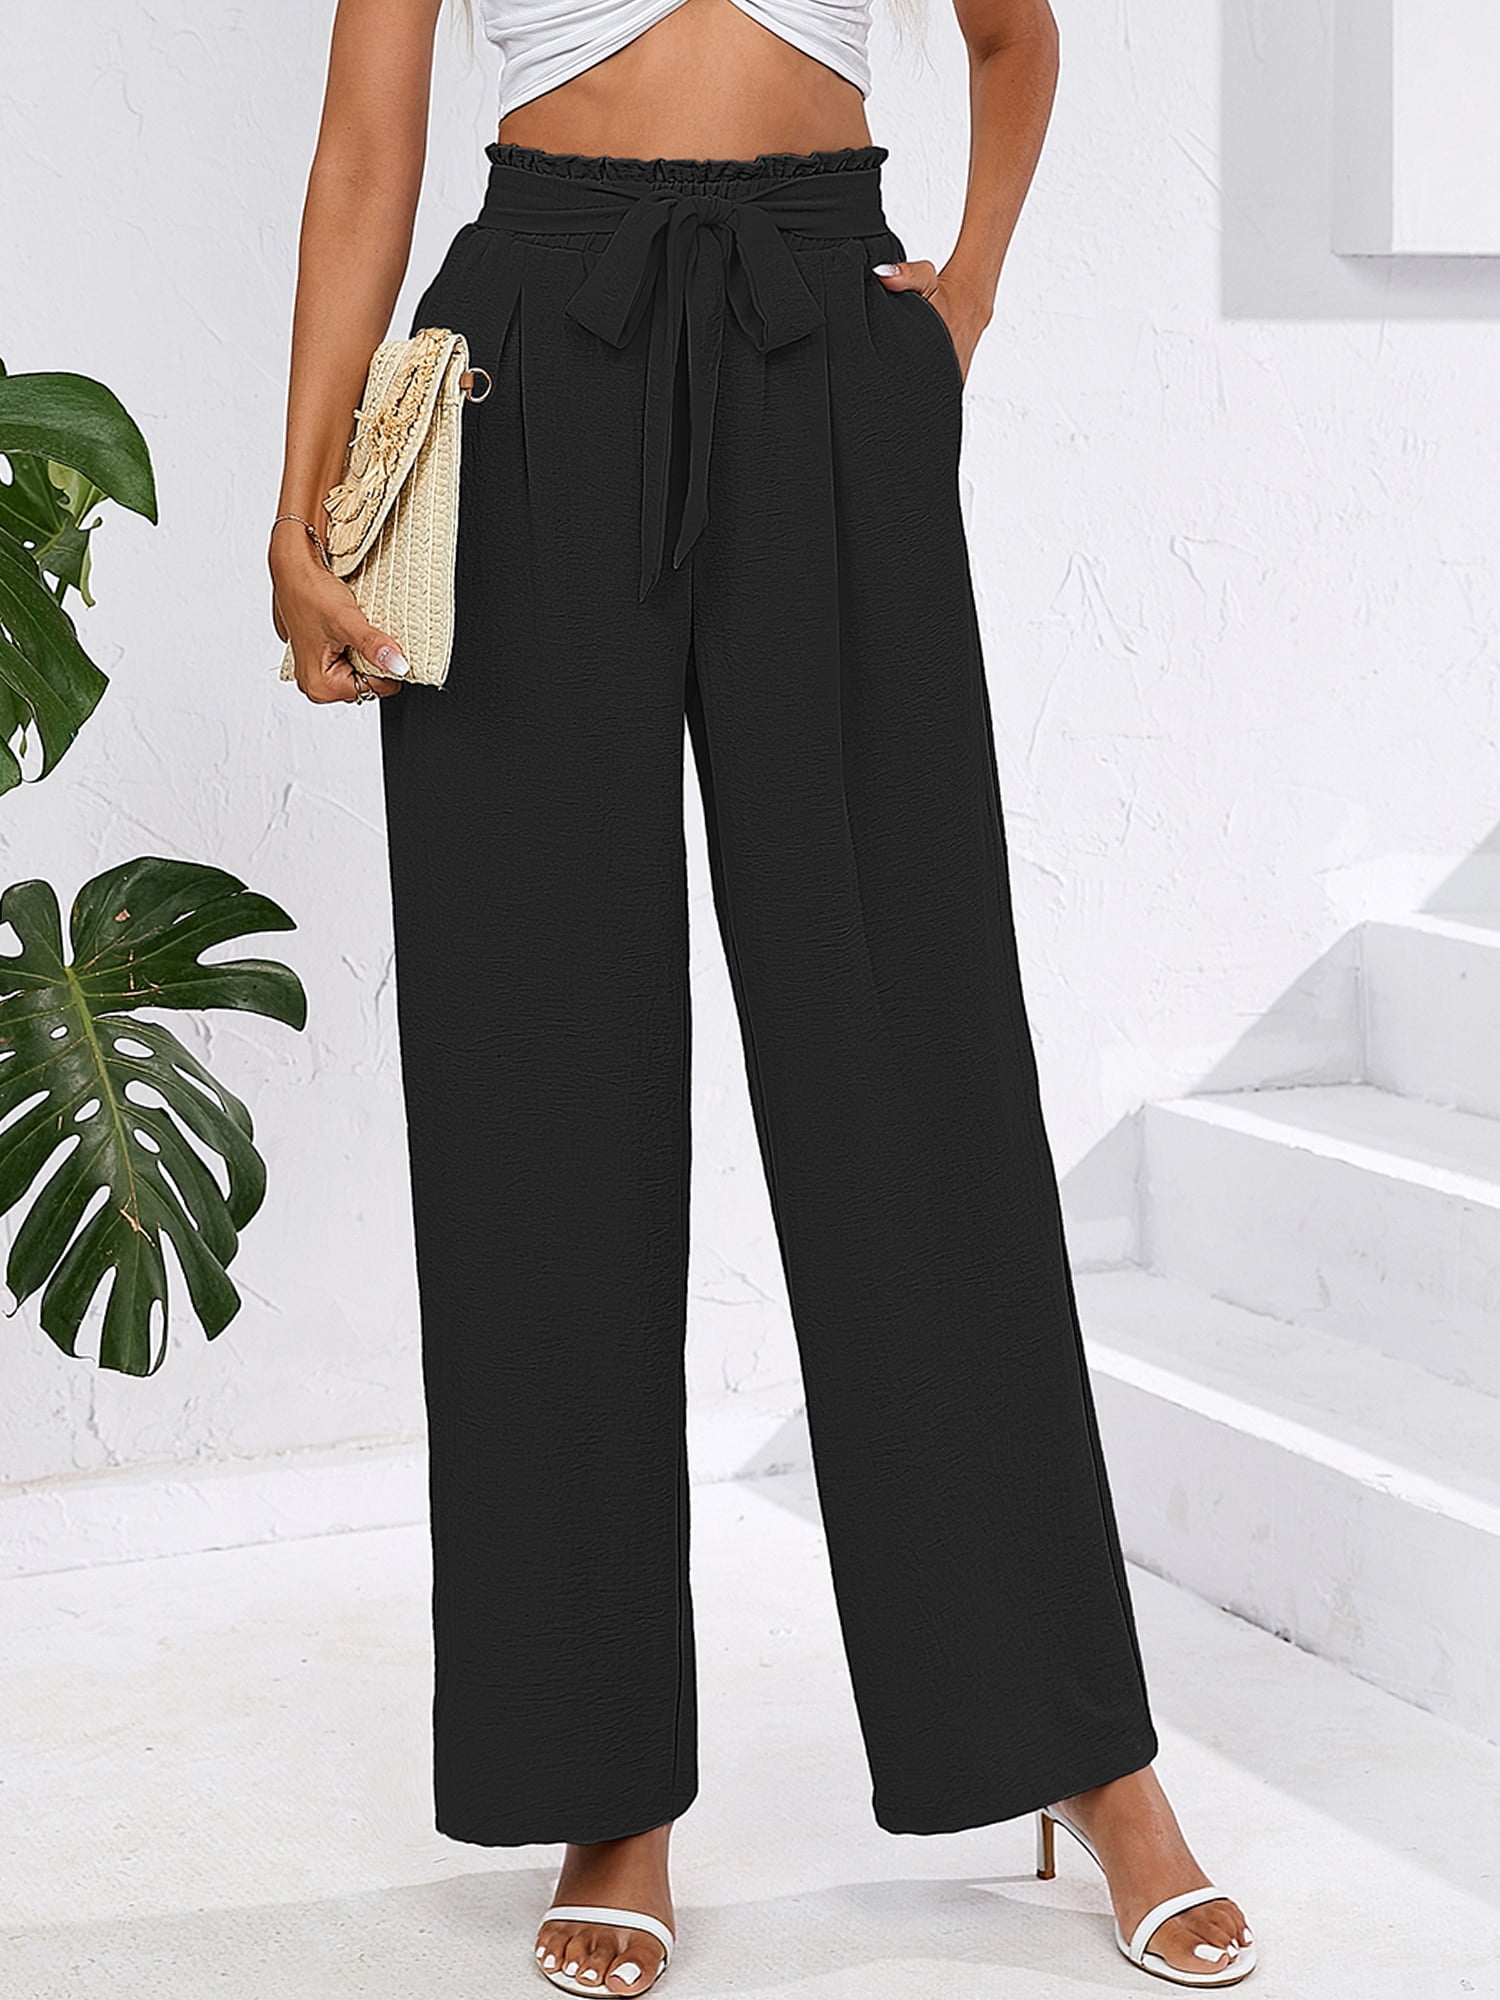 Palazzo Trousers the dressed up way - Fashion Container - Fashion and  Travel blog